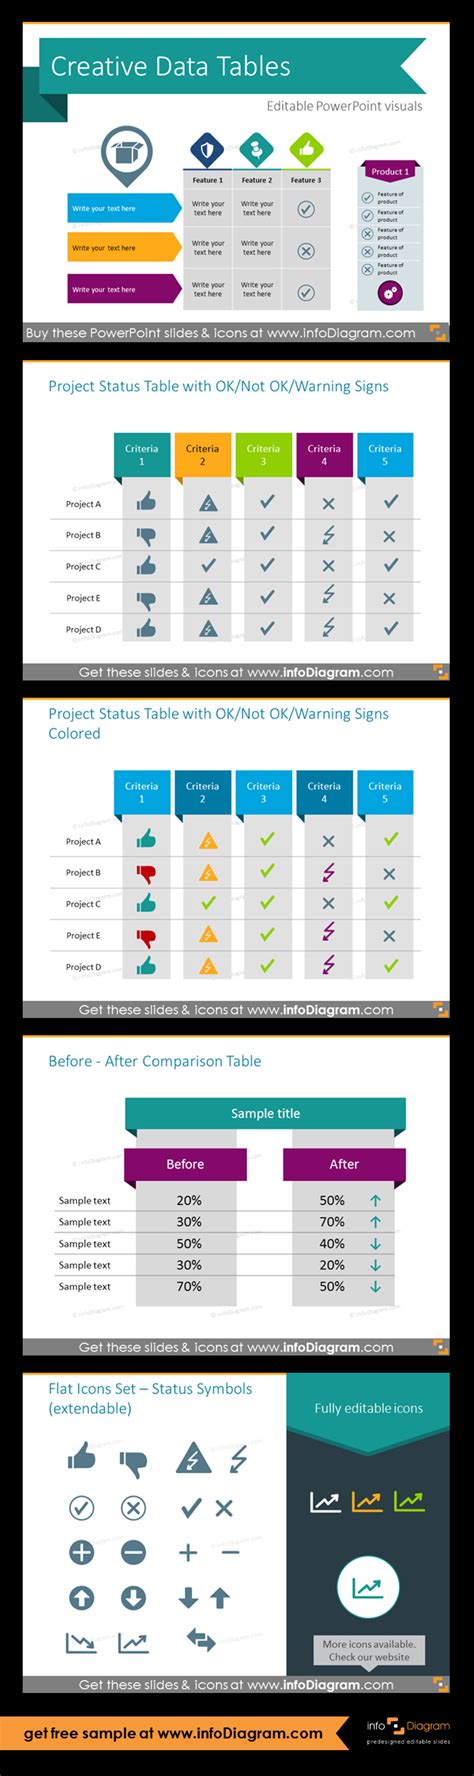 Powerpoint table templates. Project status table monocolor and colored, before-after comparison ...